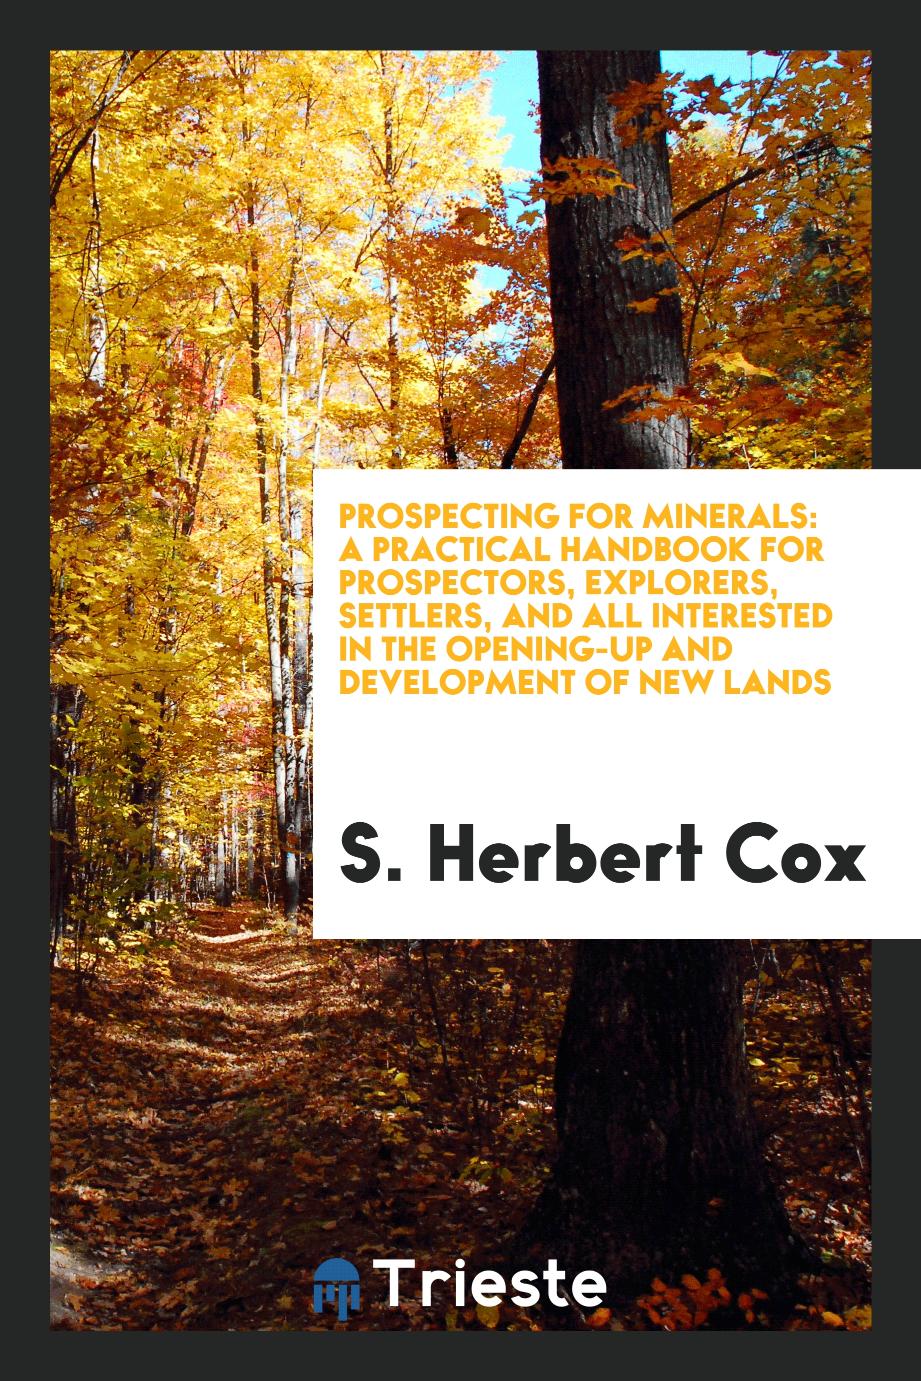 Prospecting for Minerals: A Practical Handbook for Prospectors, Explorers, Settlers, and All Interested in the Opening-Up and Development of New Lands